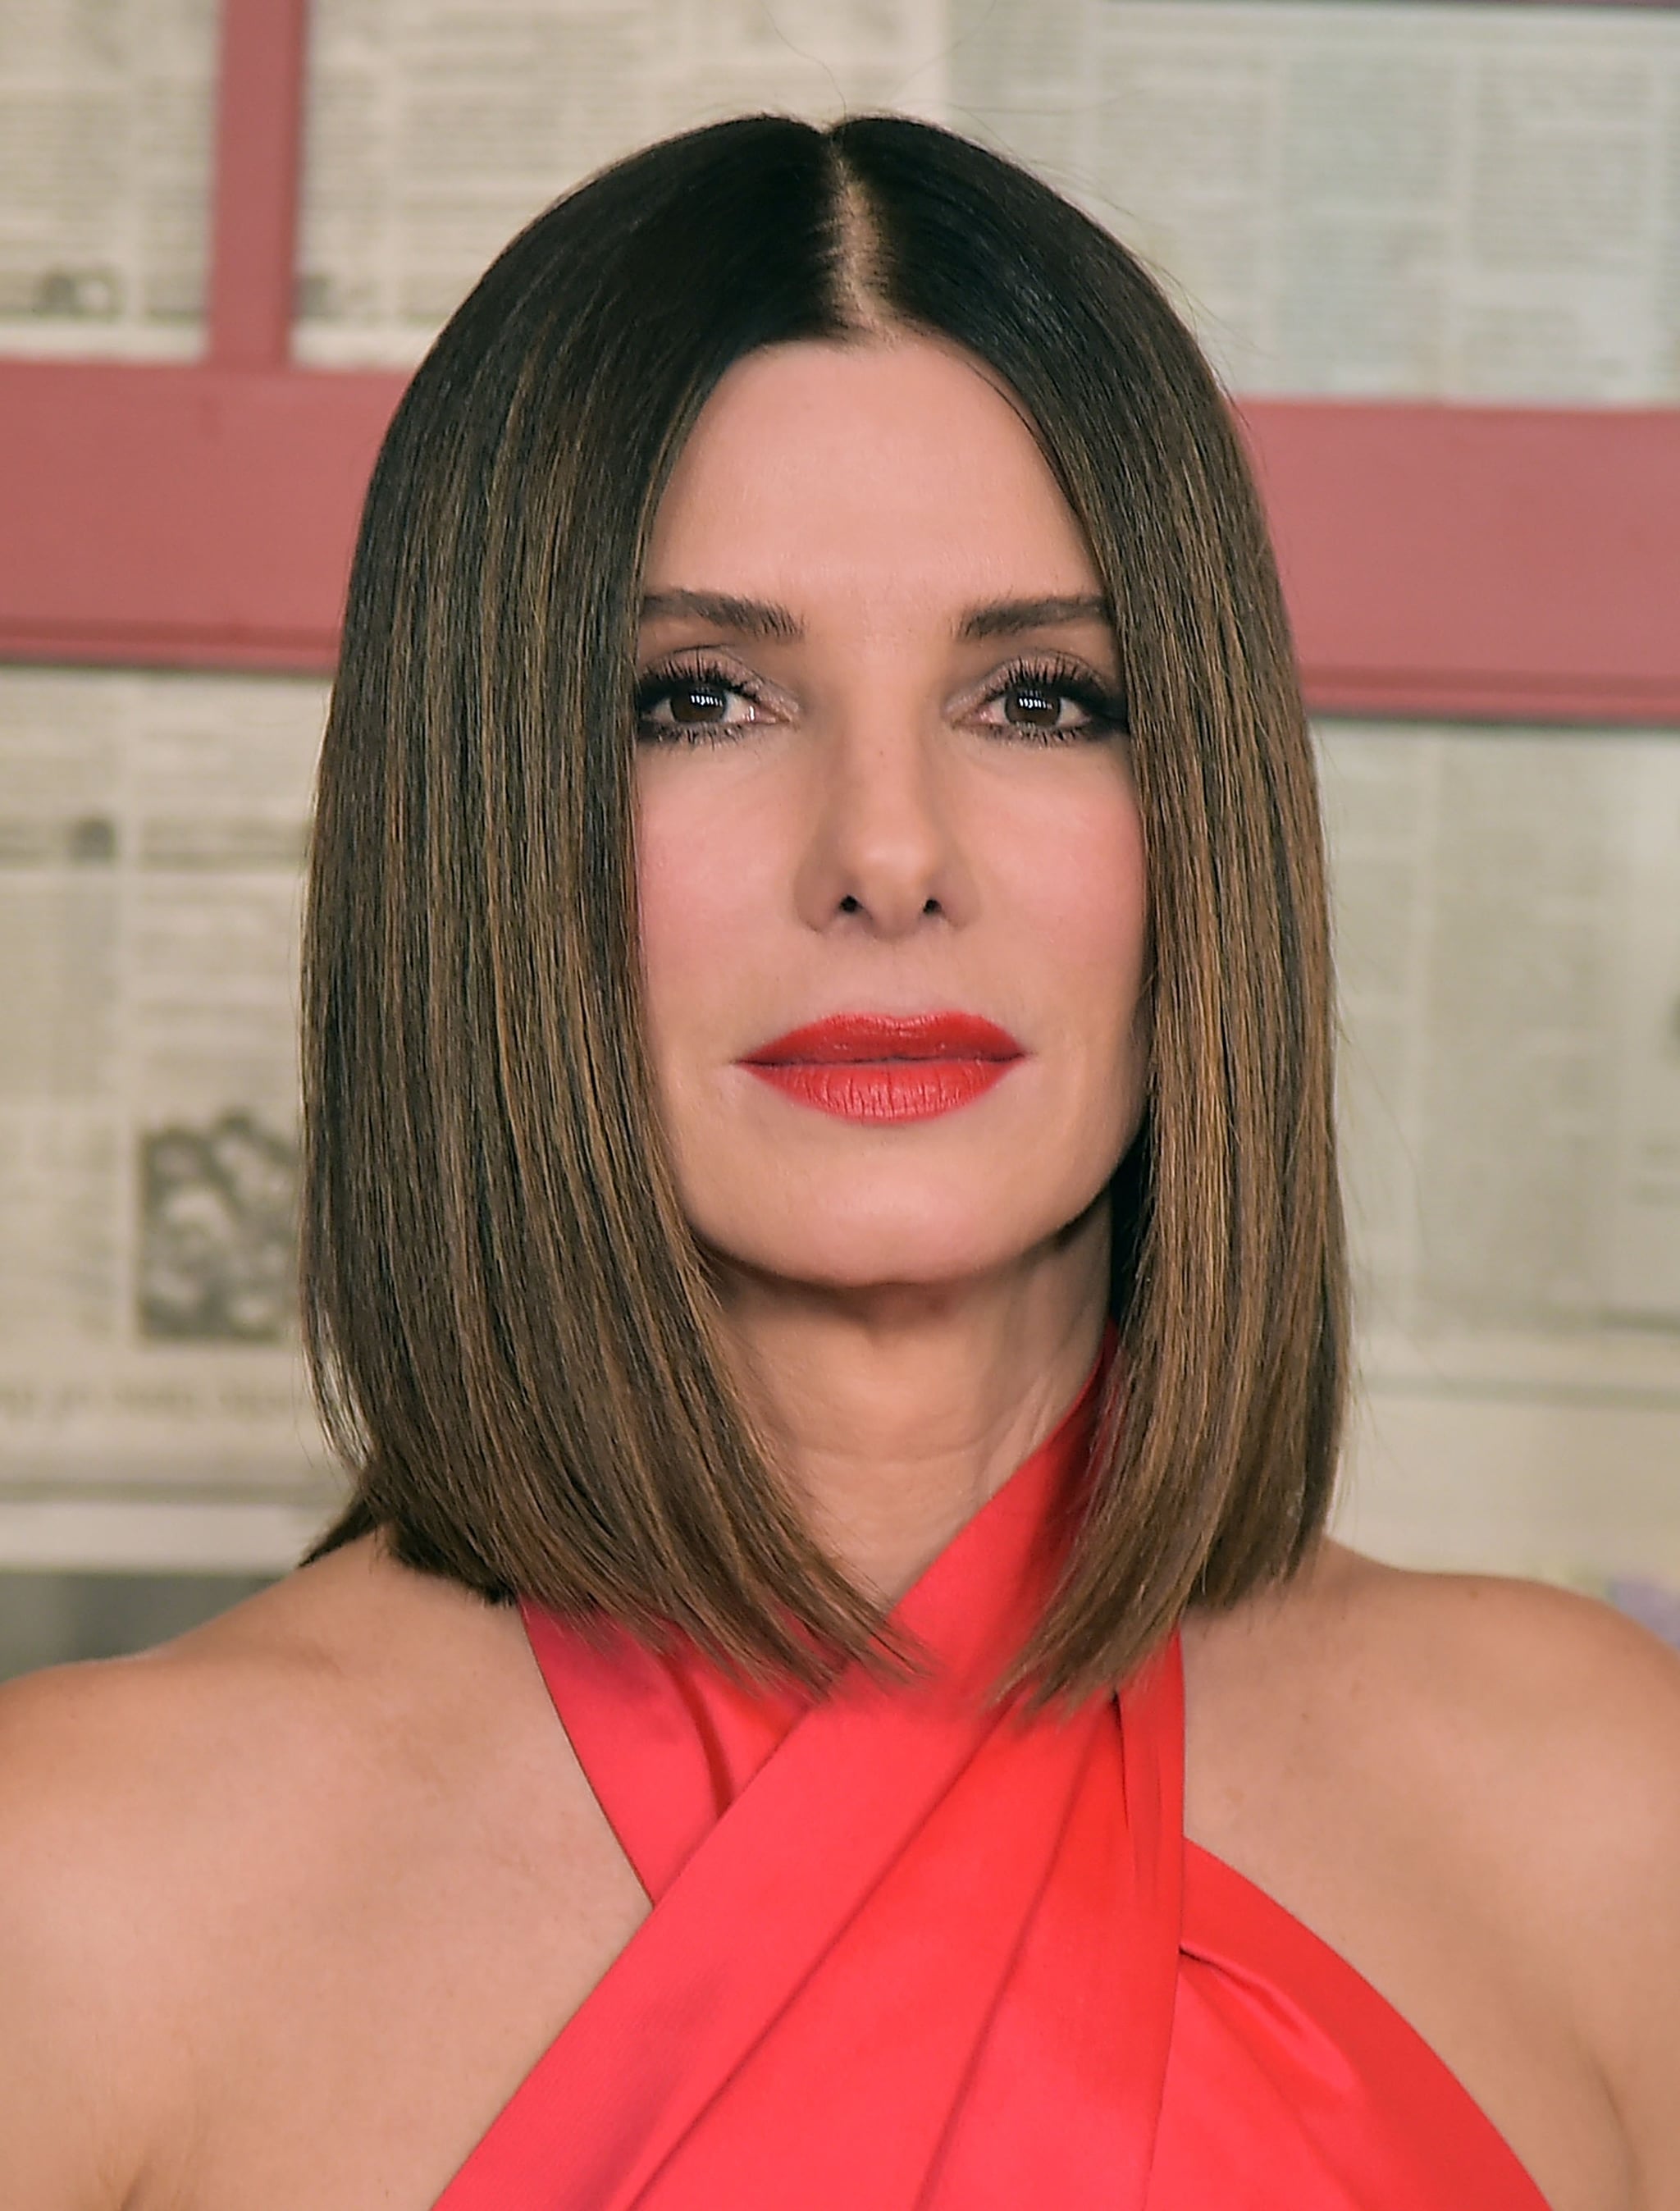 Sandra Bullock Quotes About Her Haircut Today Show 2018 | POPSUGAR Beauty